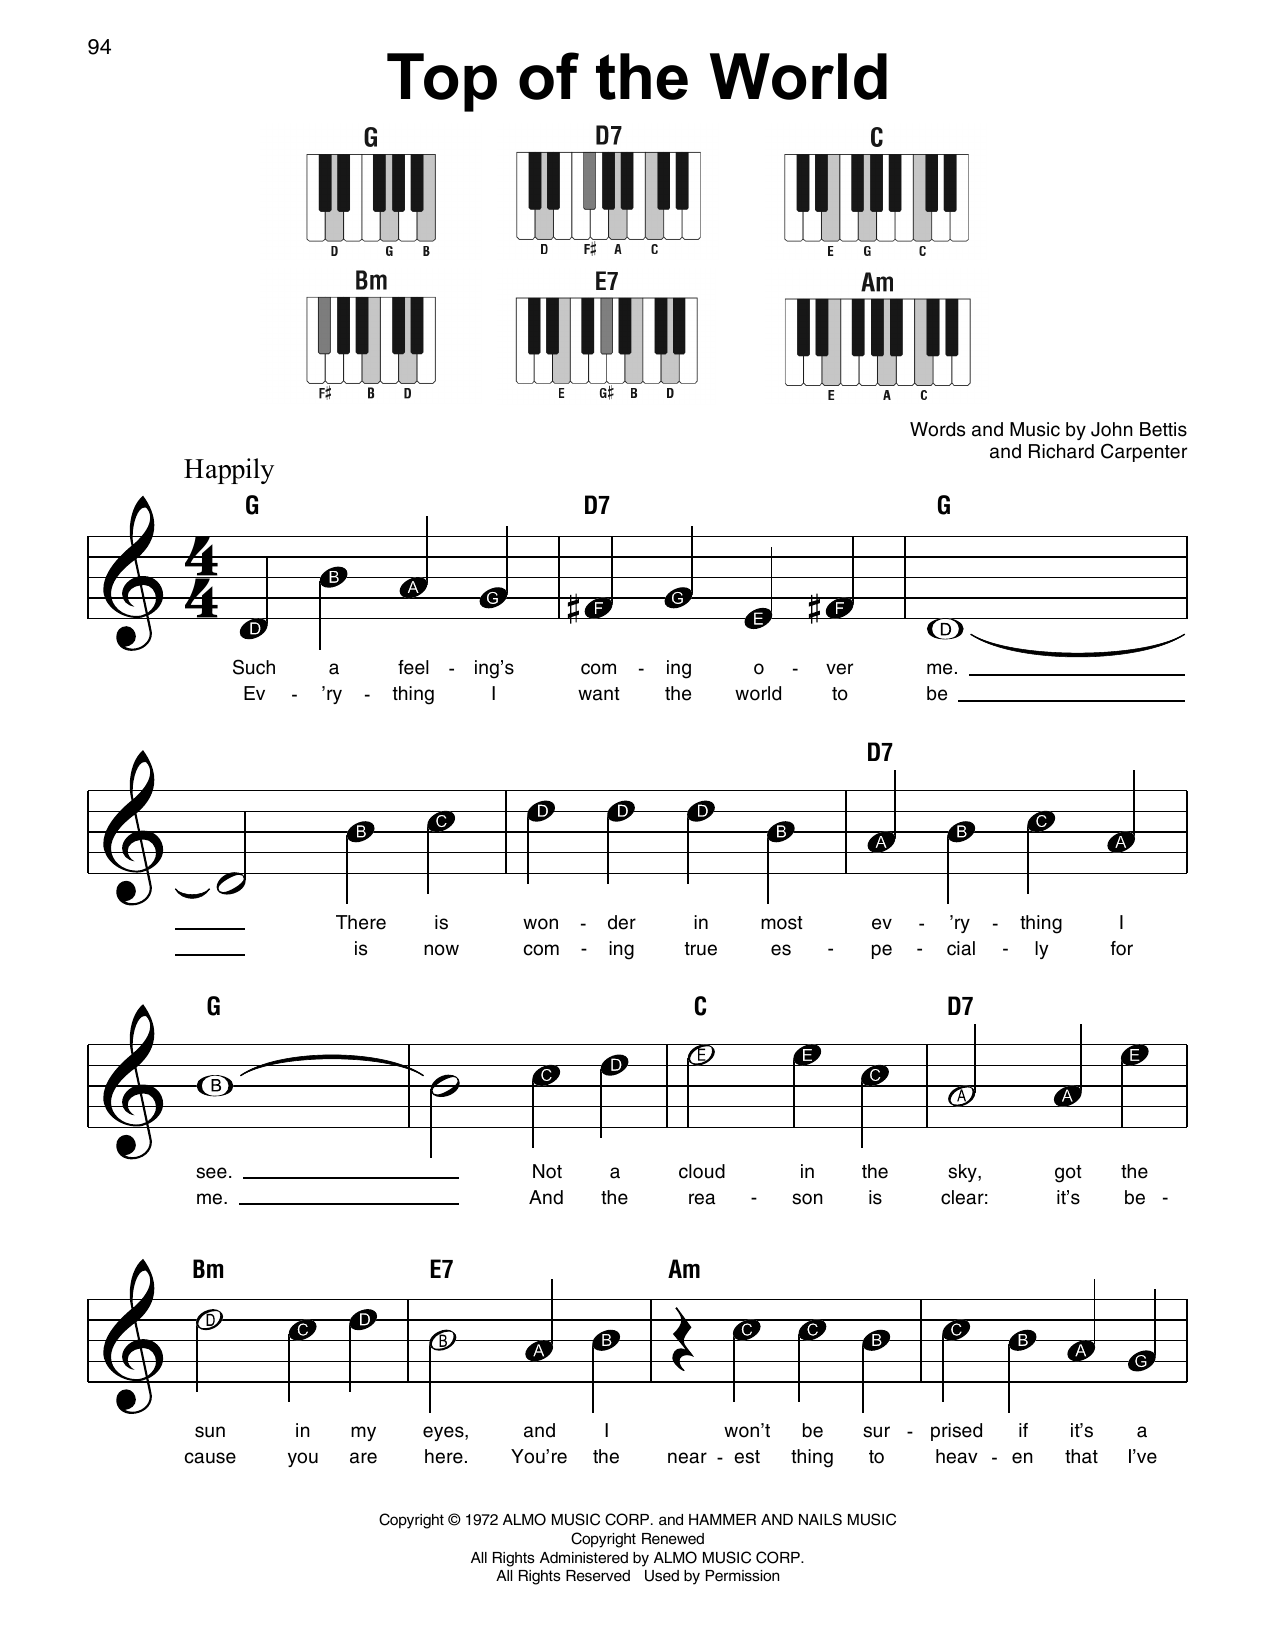 Download The Carpenters Top Of The World Sheet Music